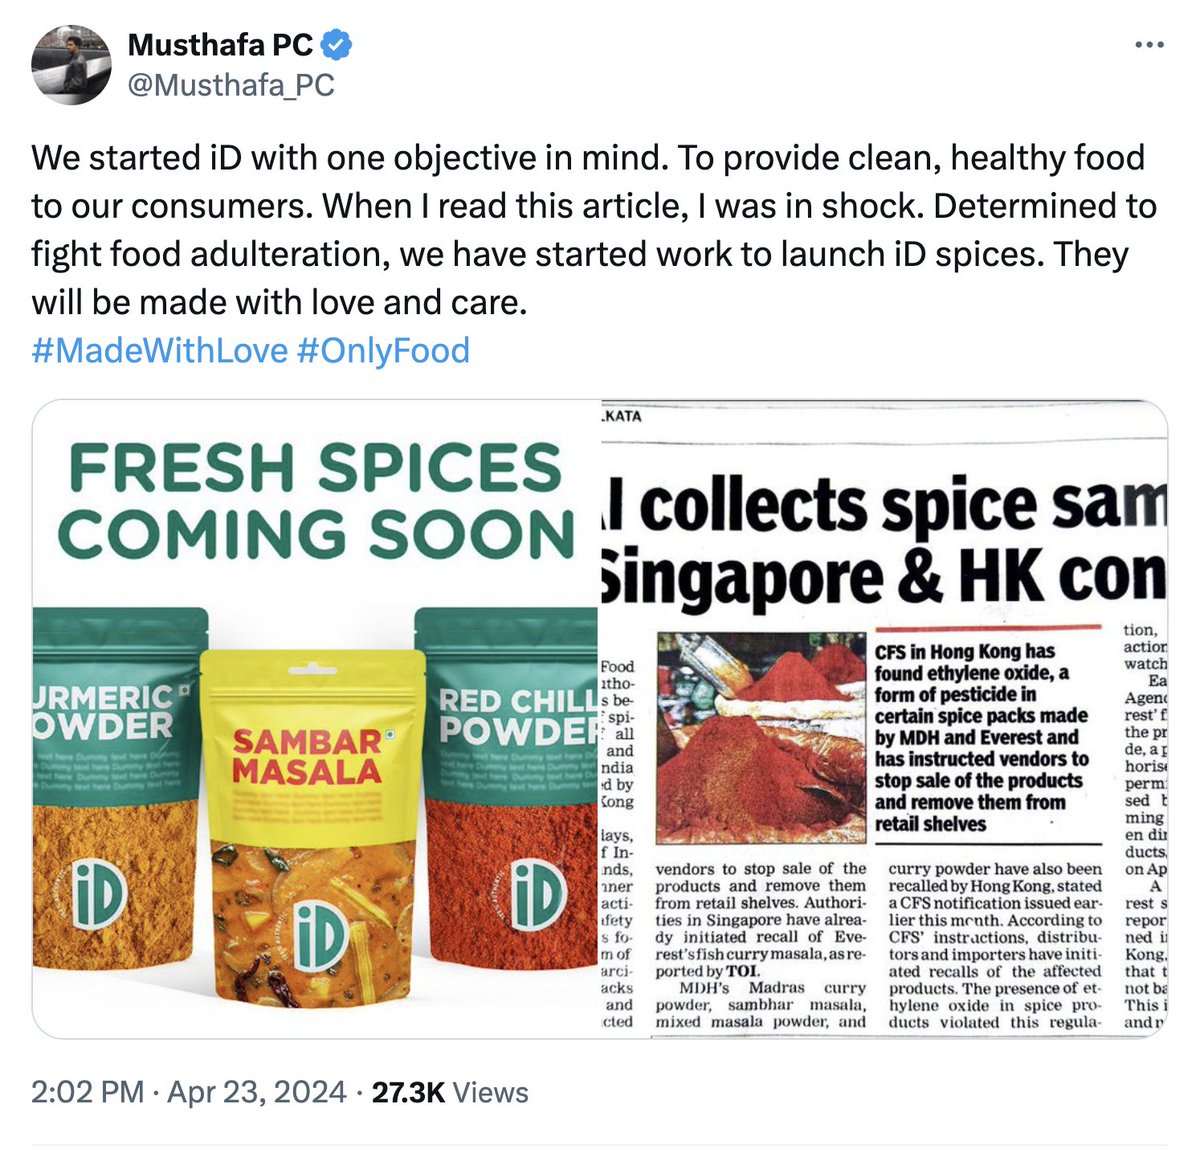 Any other masala brand (other than Everest and MDH) could have 'used' the news to proclaim themselves to be 'pure', 'clean,' and 'free from chemicals', in comparison. They did not (at least not yet), but it is disappointing to see iD, of all companies, jump into fray by 'using'…